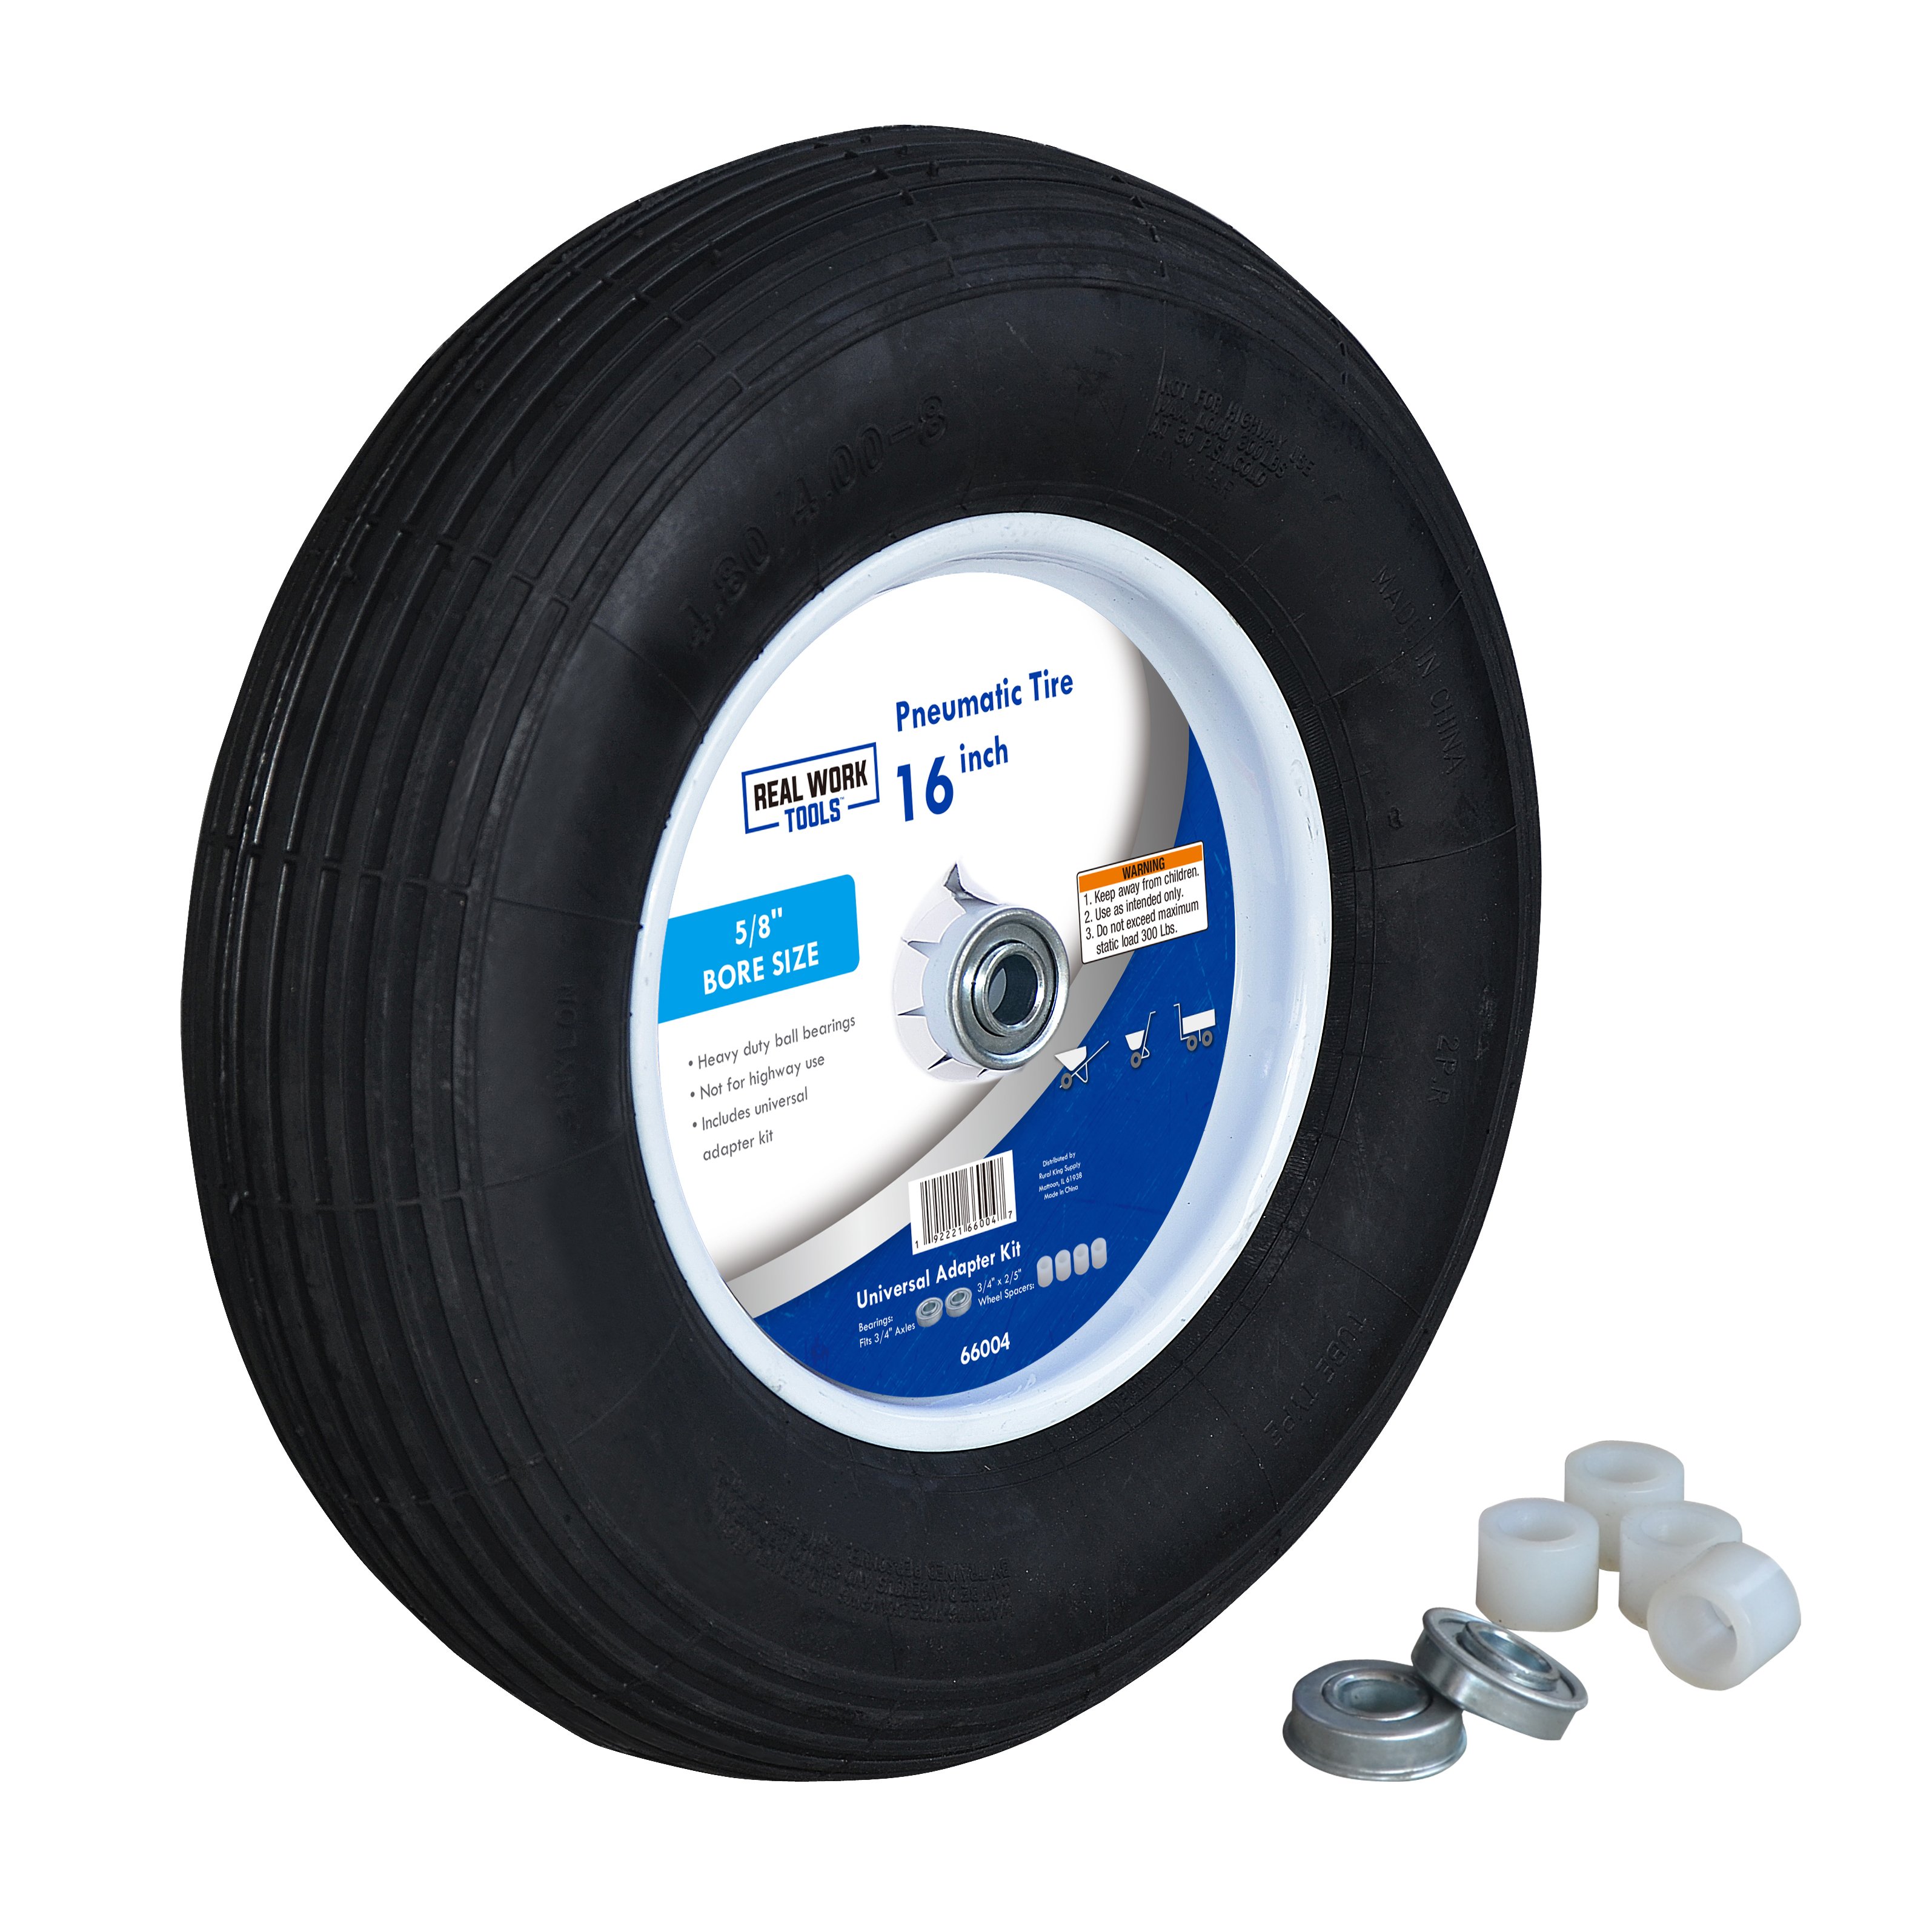 16 Inch Pneumatic Tire with Universal Bearing Kit - 66004